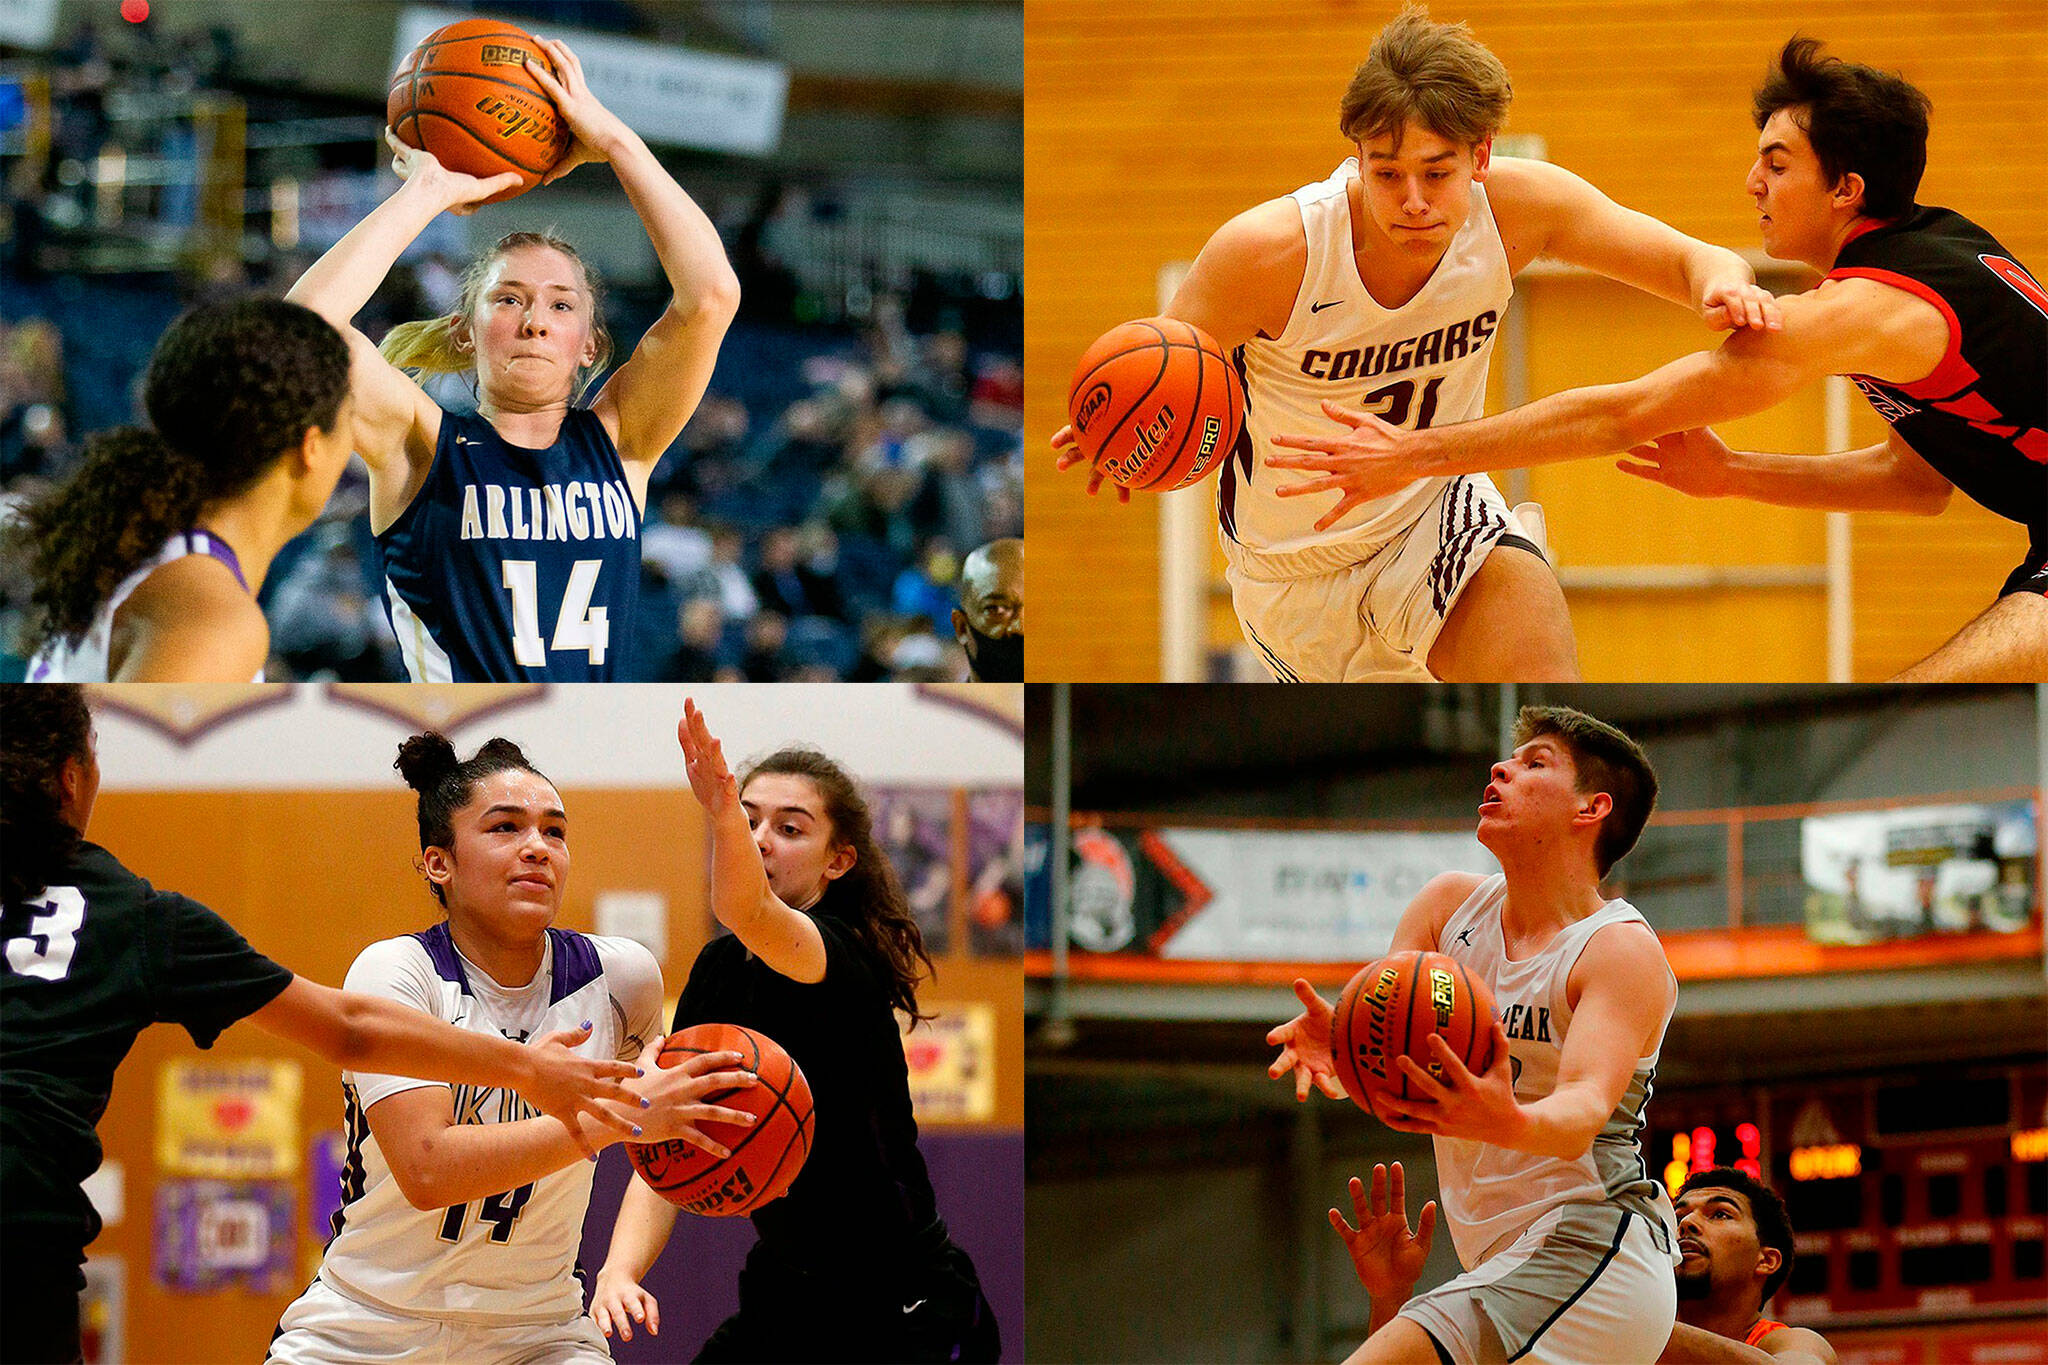 Keira Marsh (top left), Blake Conyers (top right), Baylor Thomas (bottom left) and Bobby Siebers were all selected to all-state games by Washington coaches associations. (Herald file)